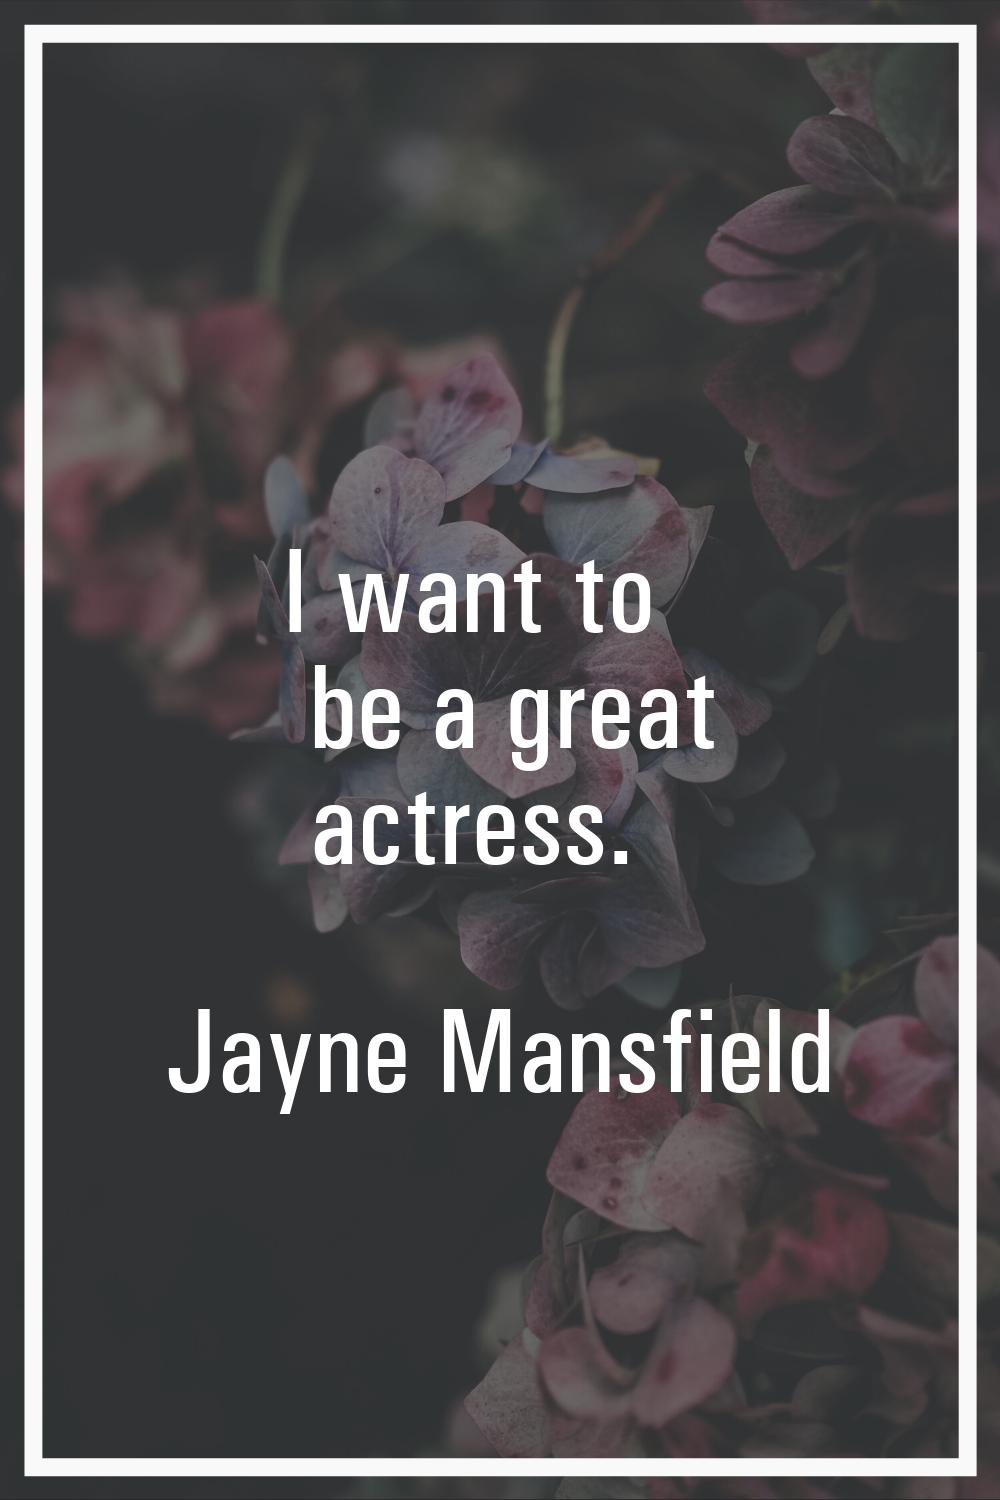 I want to be a great actress.